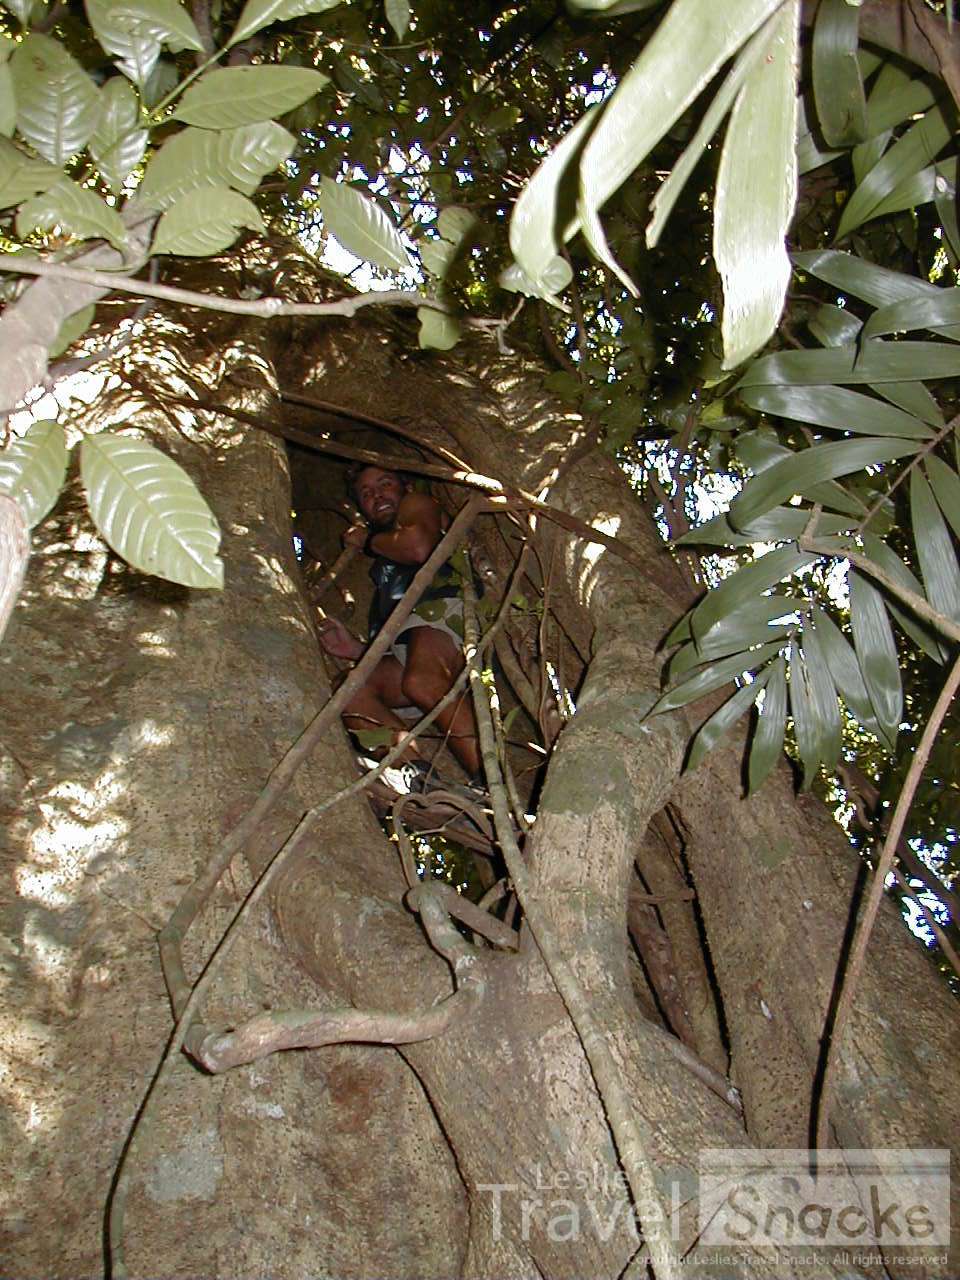 This is a strangler fig that killed the tree it wrapped around, leaving a hollow center. You can climb up inside it all the way to the top of the canopy! Look, that's Steve in the tree!